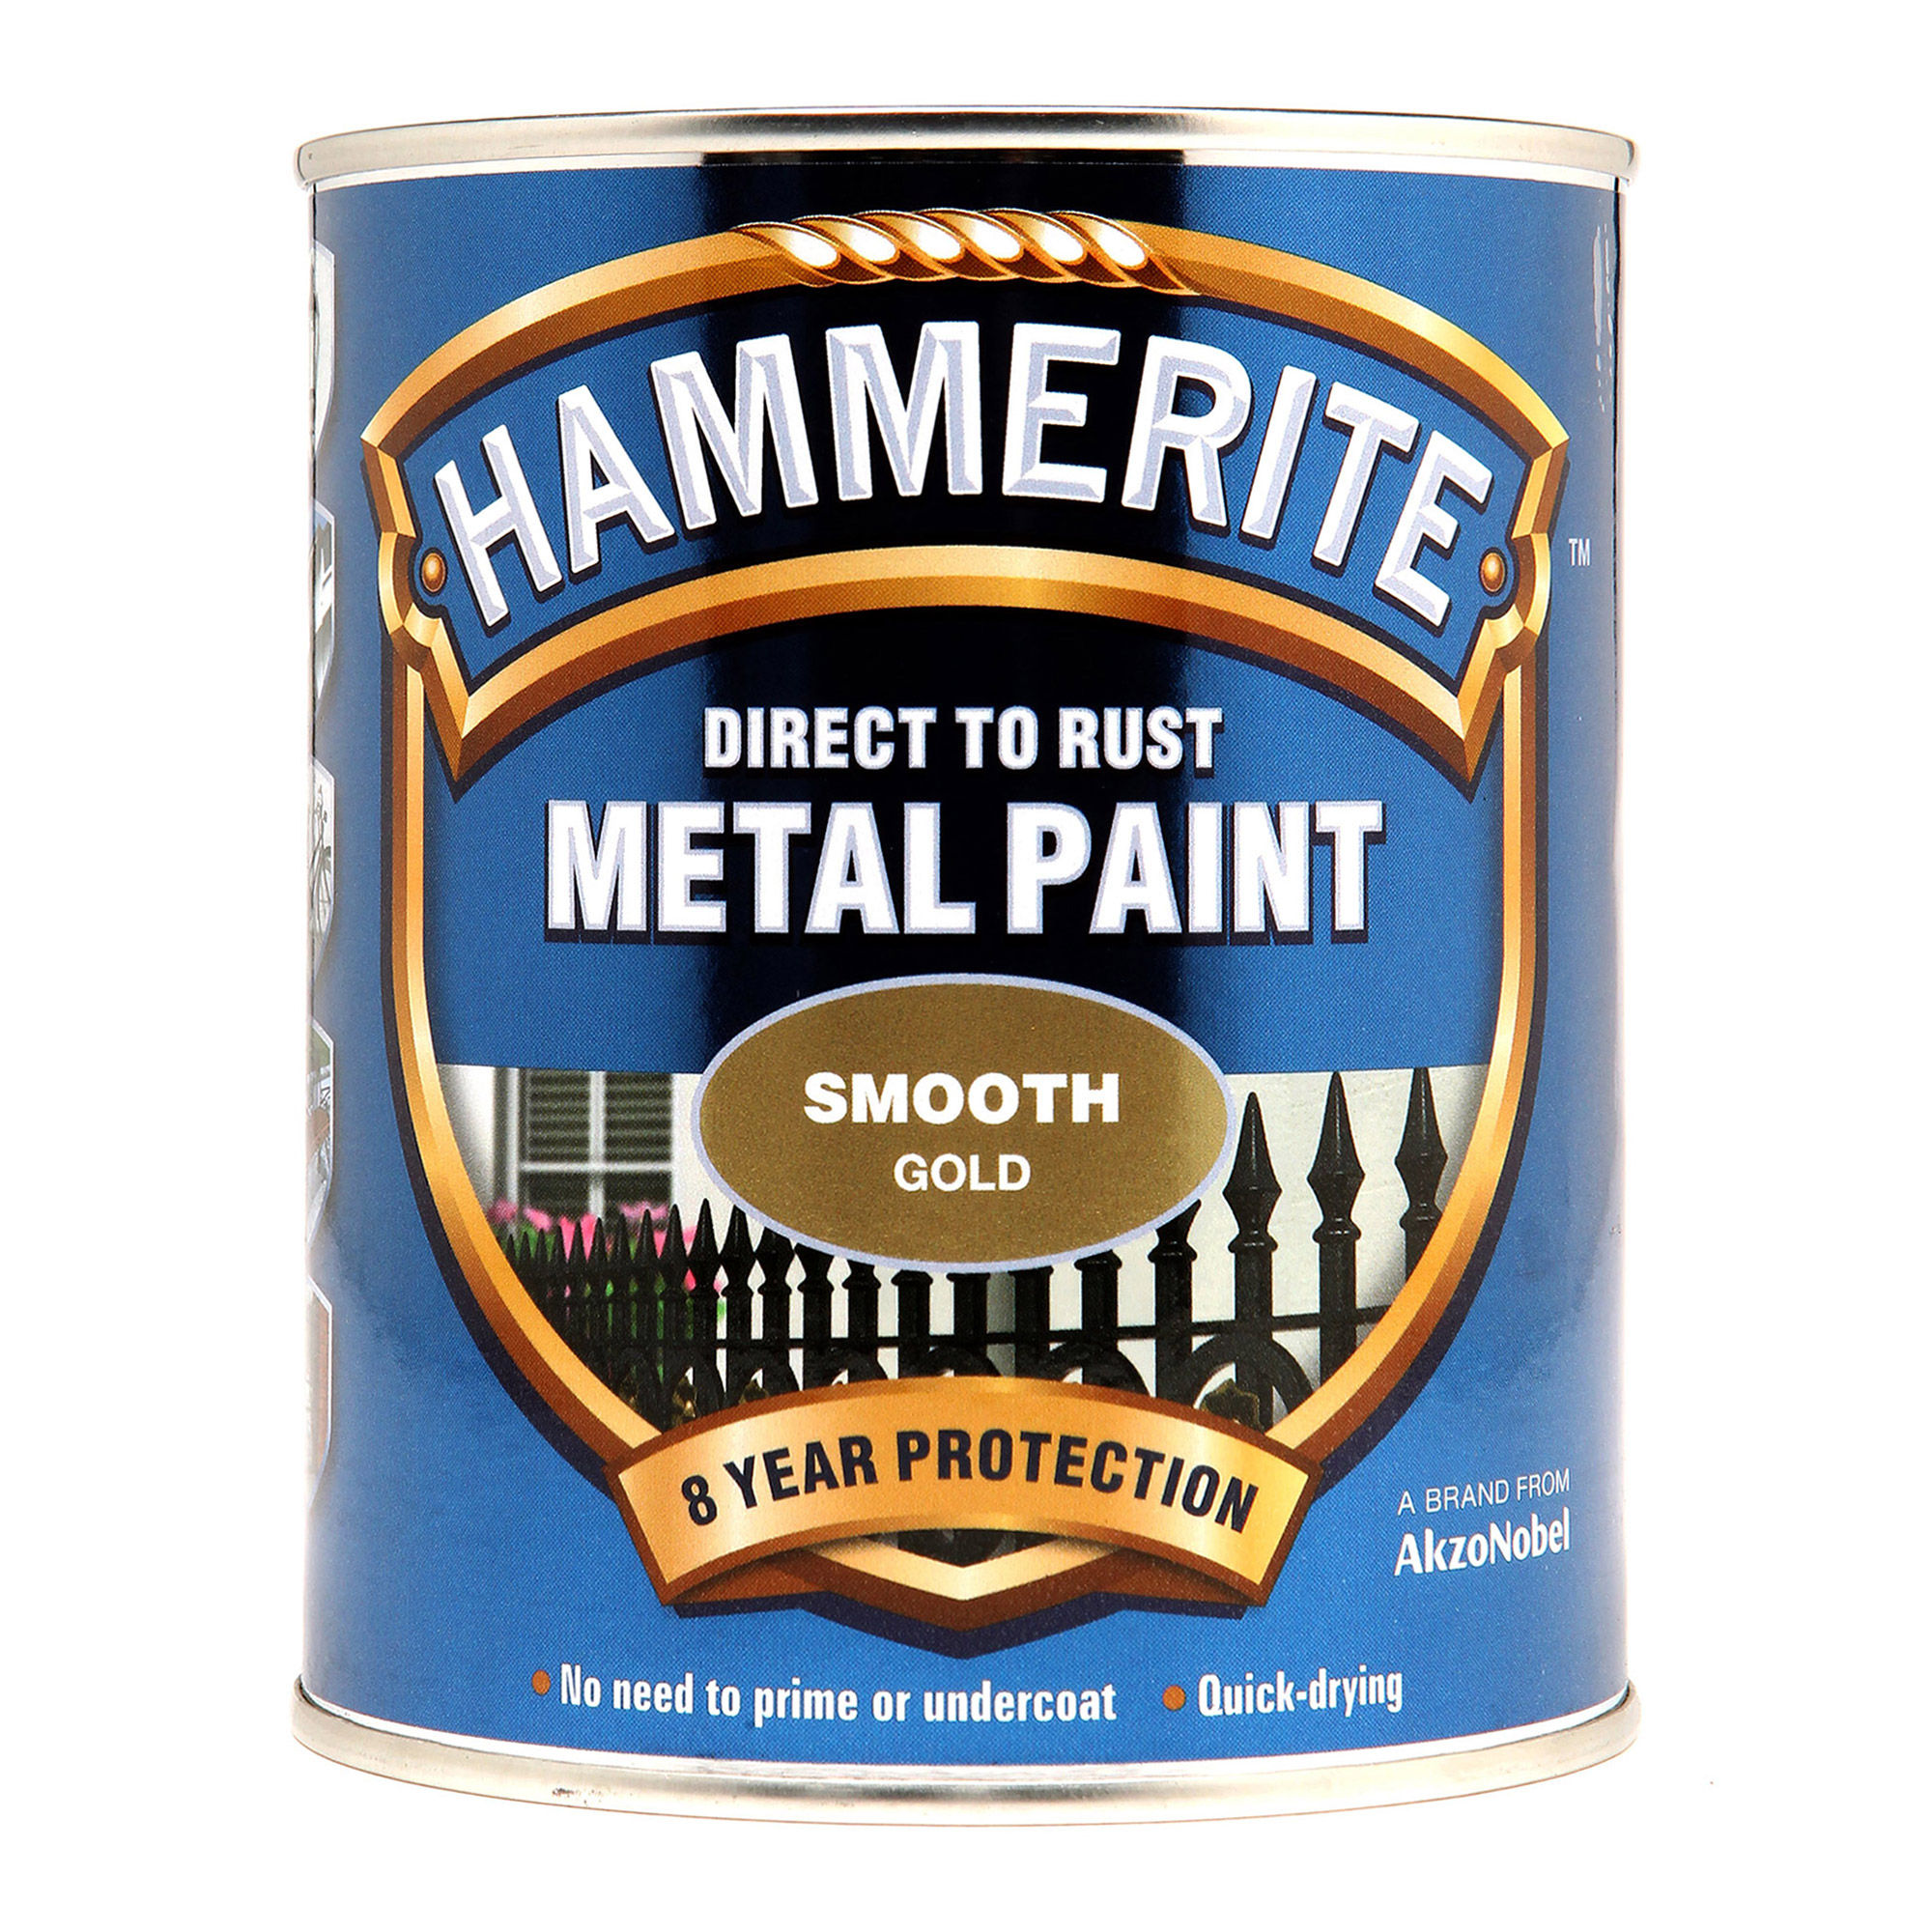 Hammerite Direct to Rust Metal Paint Smooth Finish Gold